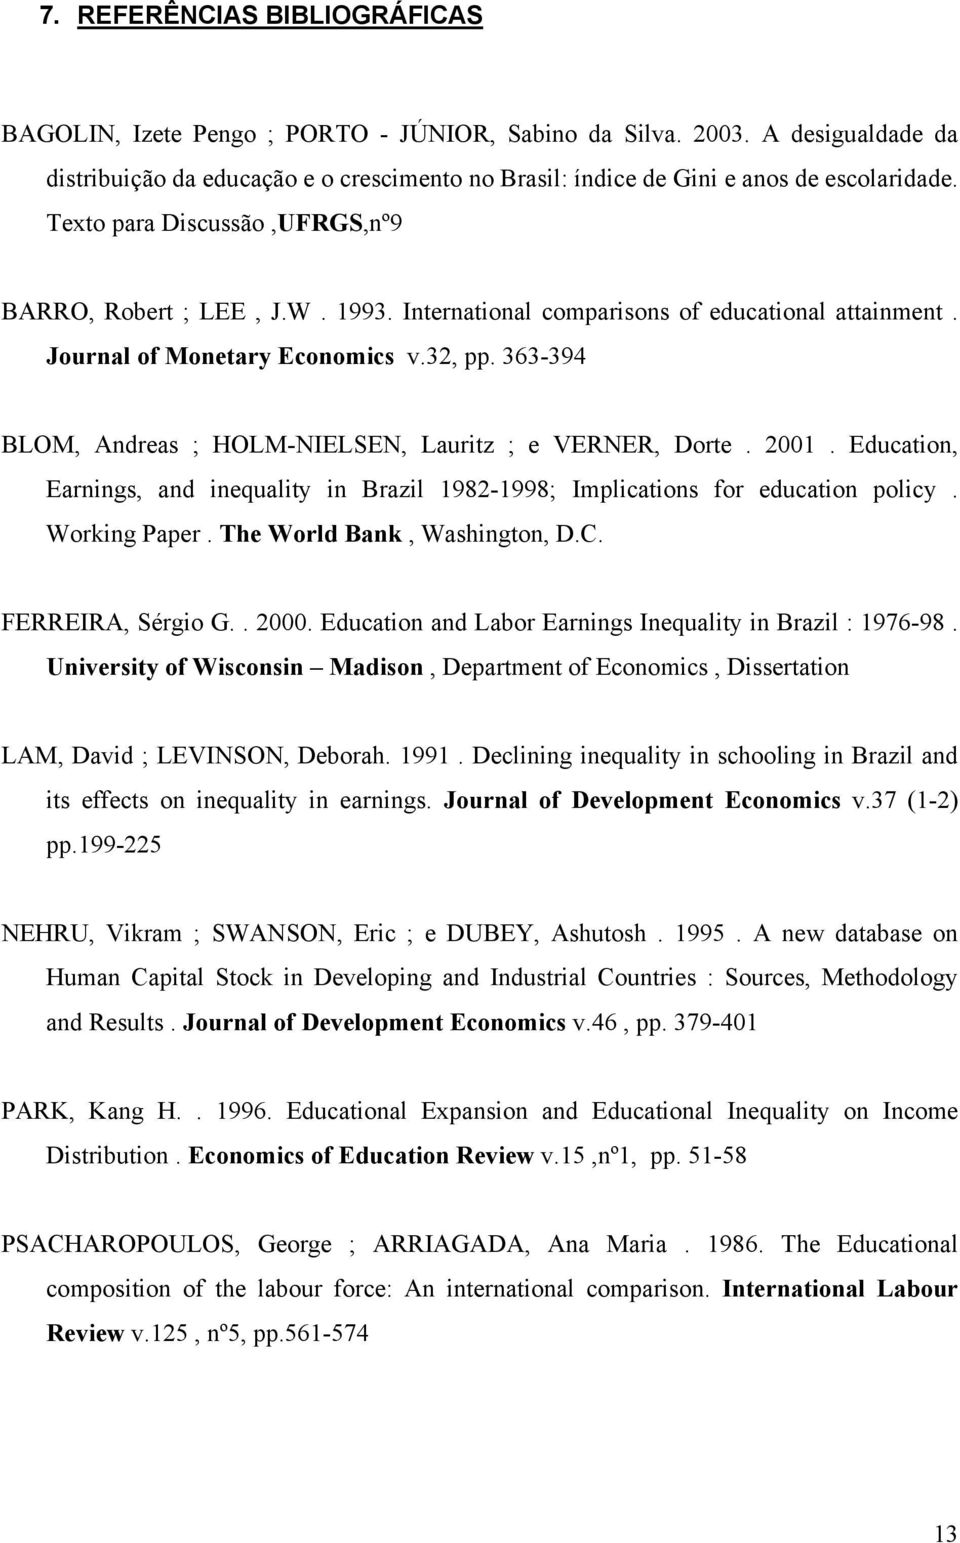 363-394 BLOM, Andreas ; HOLM-NIELSEN, Lauritz ; e VERNER, Dorte. 2001. Education, Earnings, and inequality in Brazil 1982-1998; Implications for education policy. Working Paper.